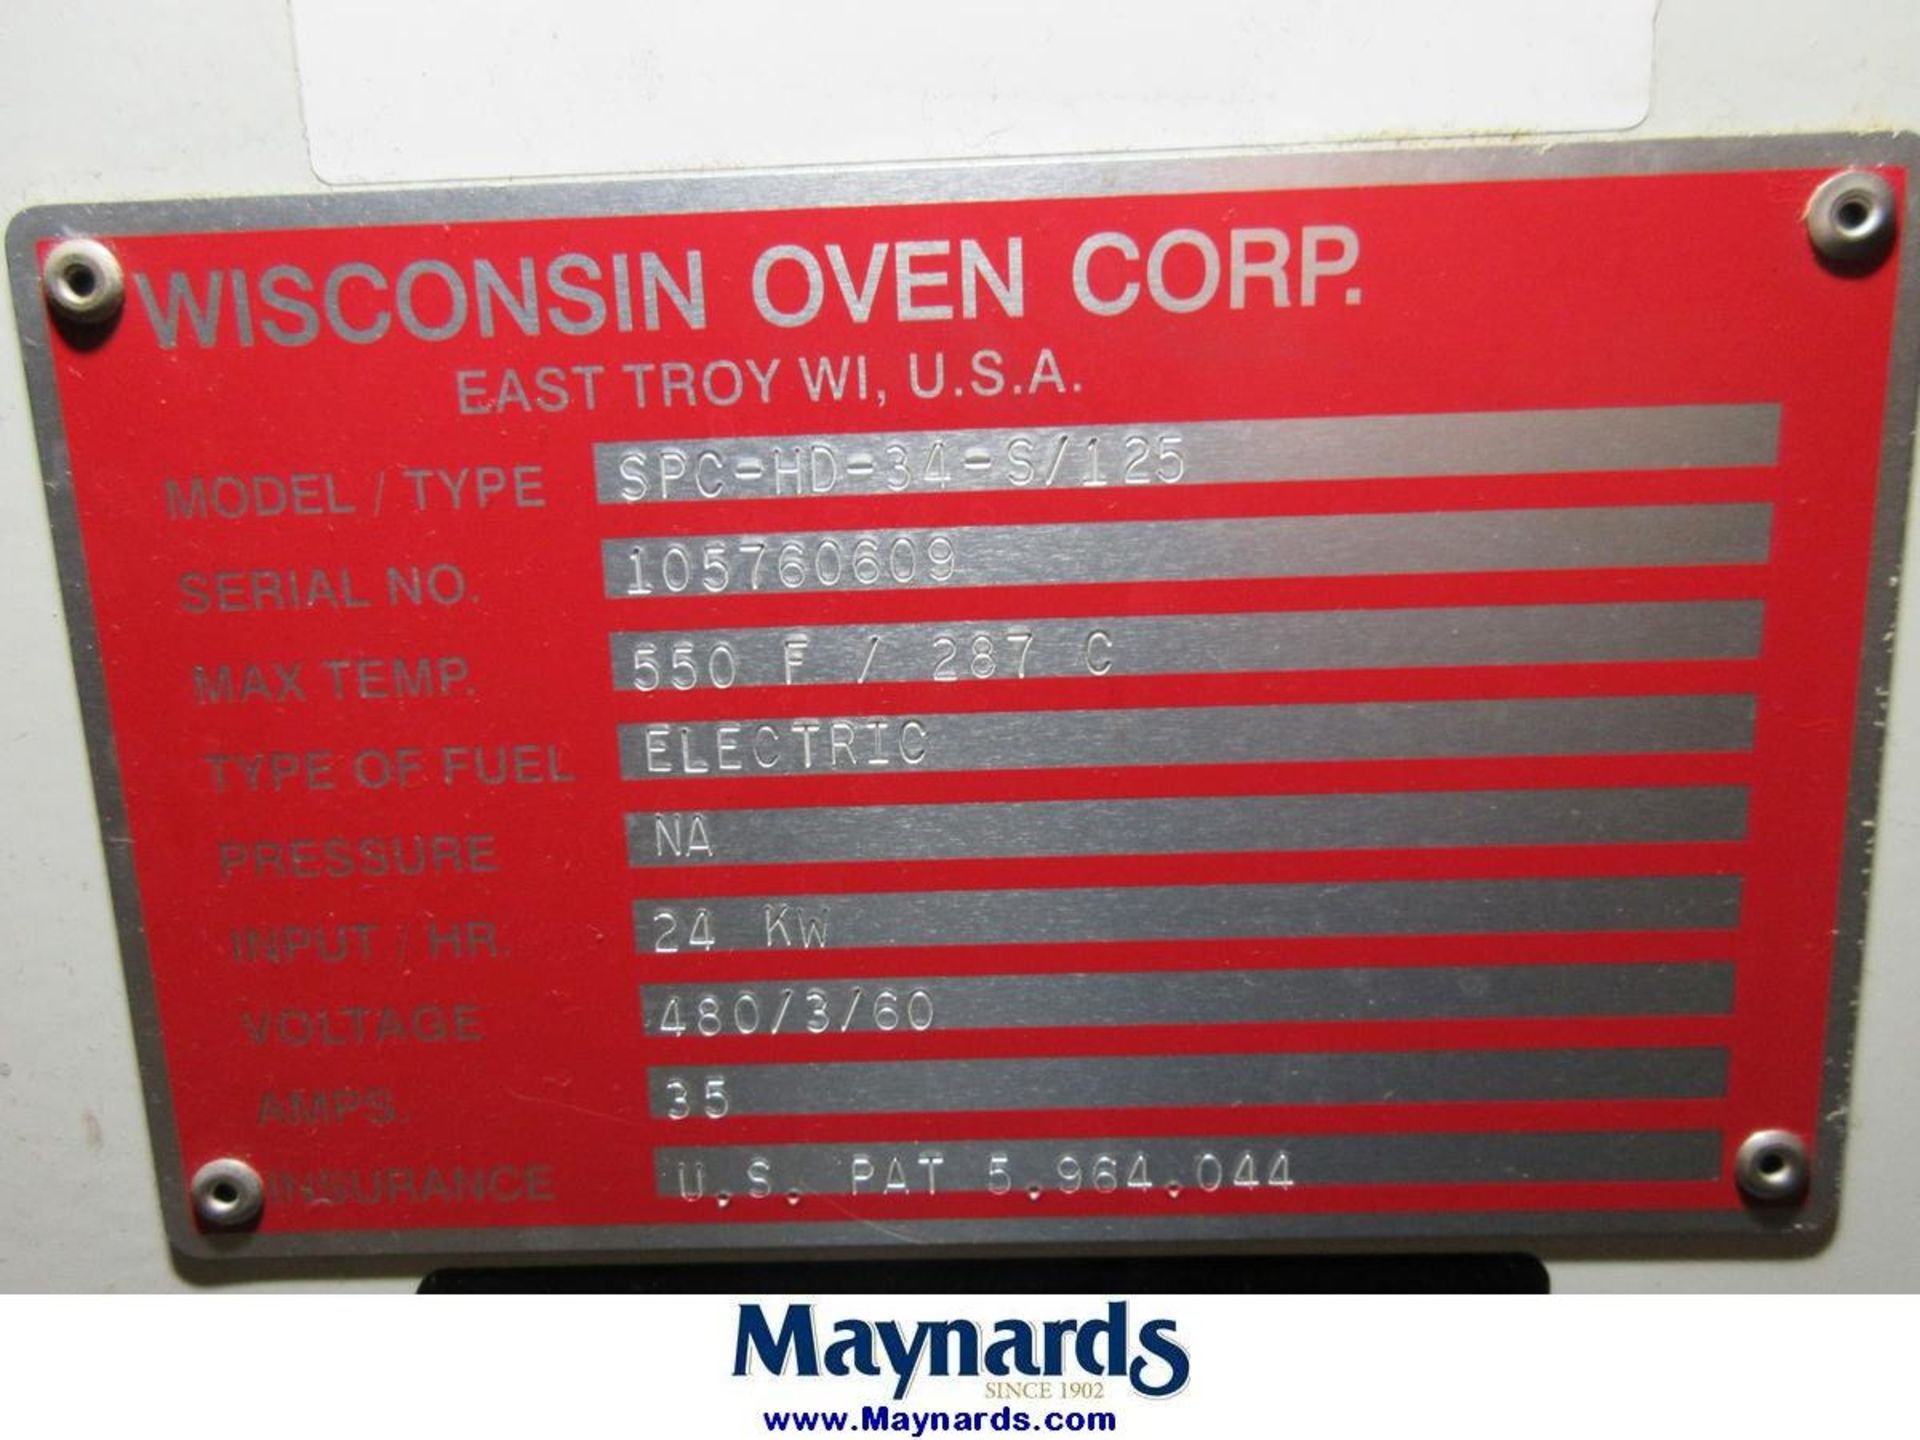 Wisconsin Oven Corp SPC-HD-34-S/125 34" Electric Conveyor Pass Through Plate Oven - Image 9 of 9